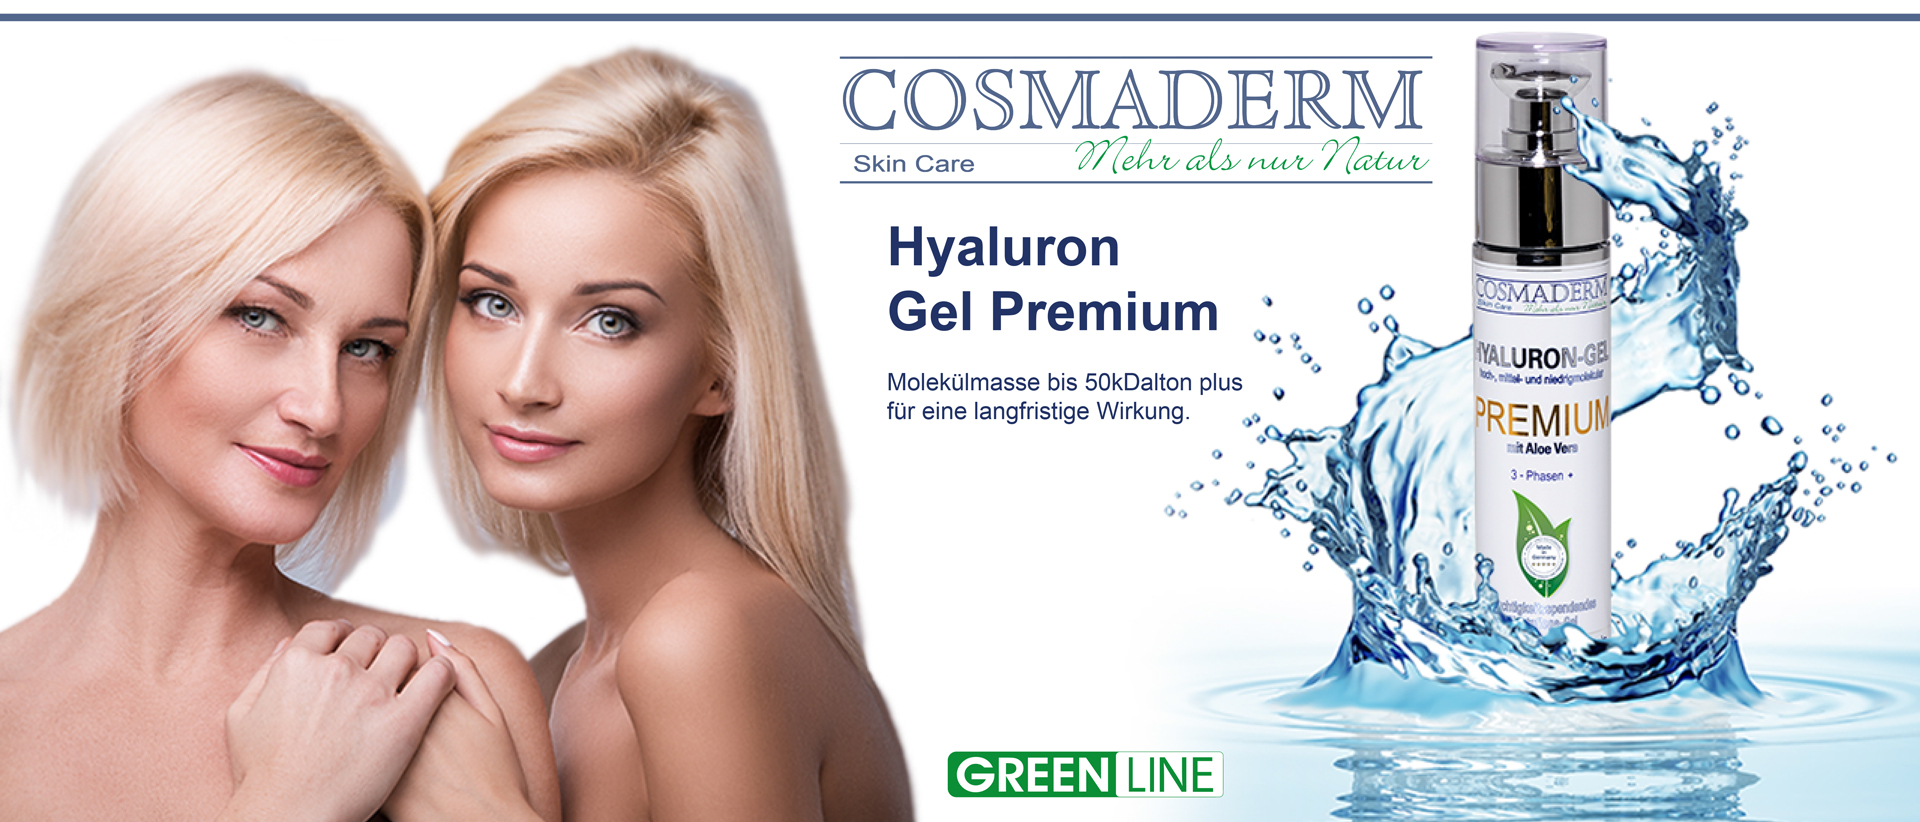 Cosmaderm - Skin Care